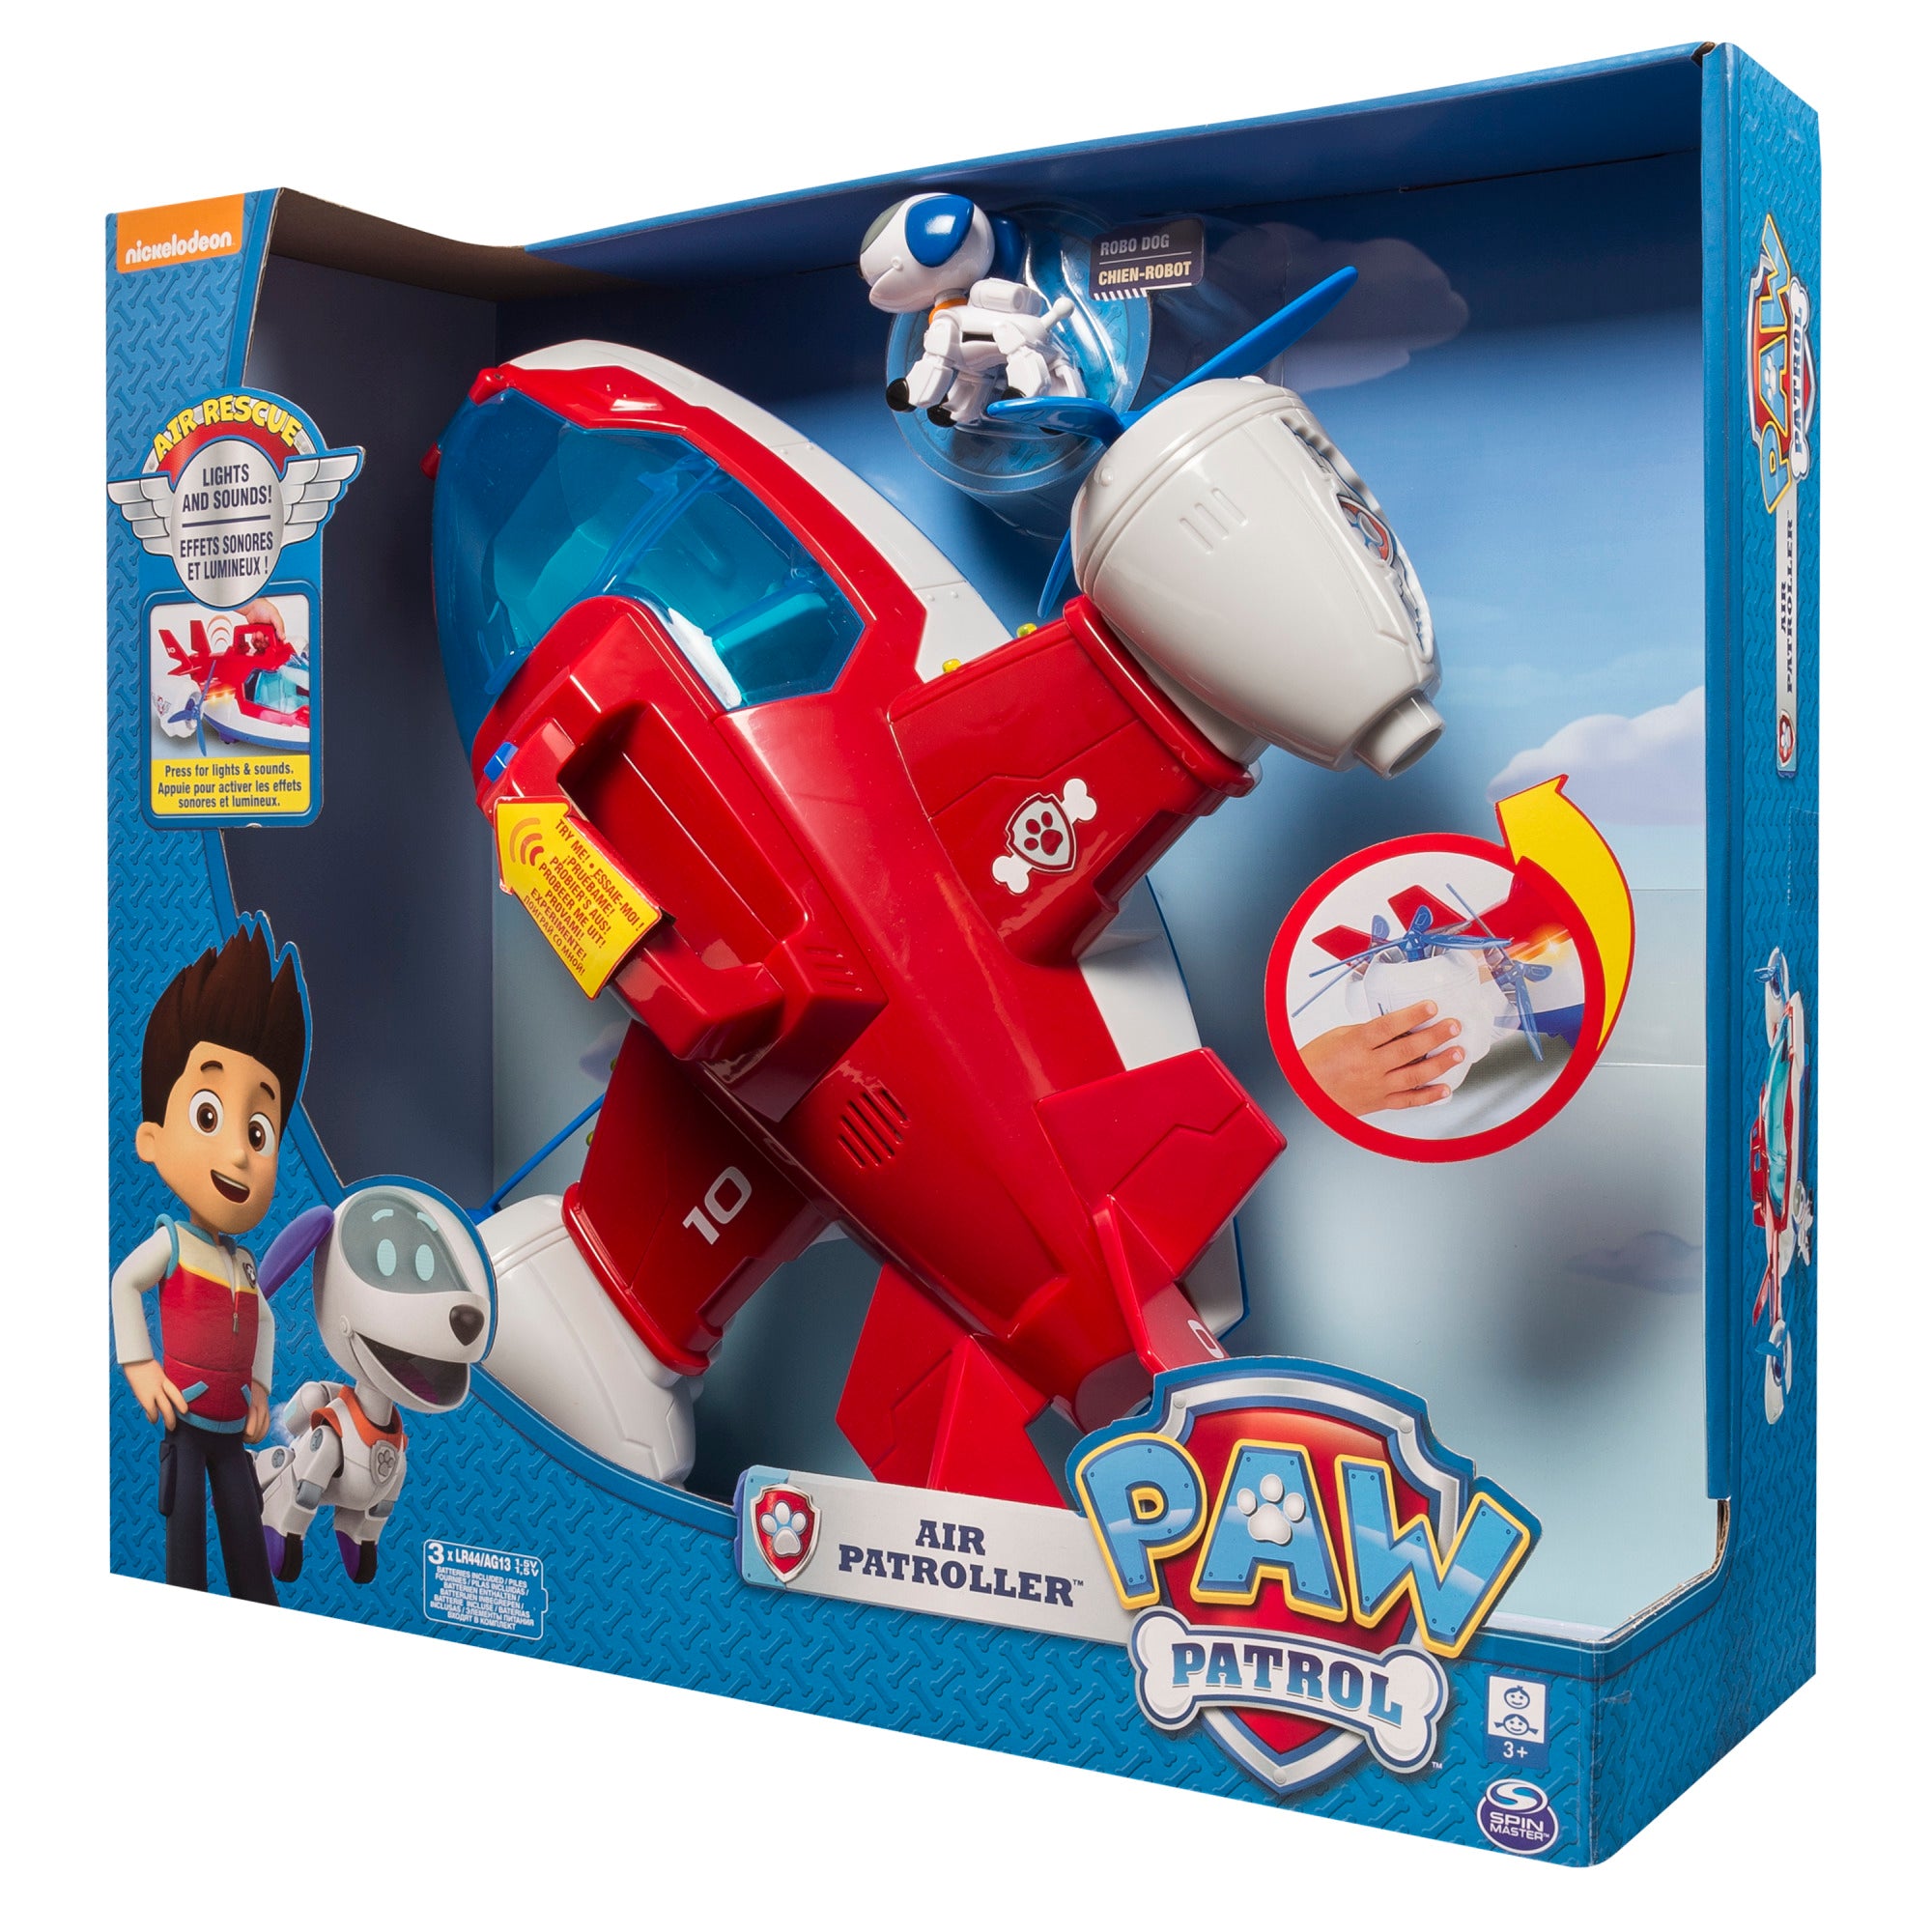 Winmagic Paw Patrol Robo Pup 2-in-1 Mode Air Patroller For Kids 3 Years and Above